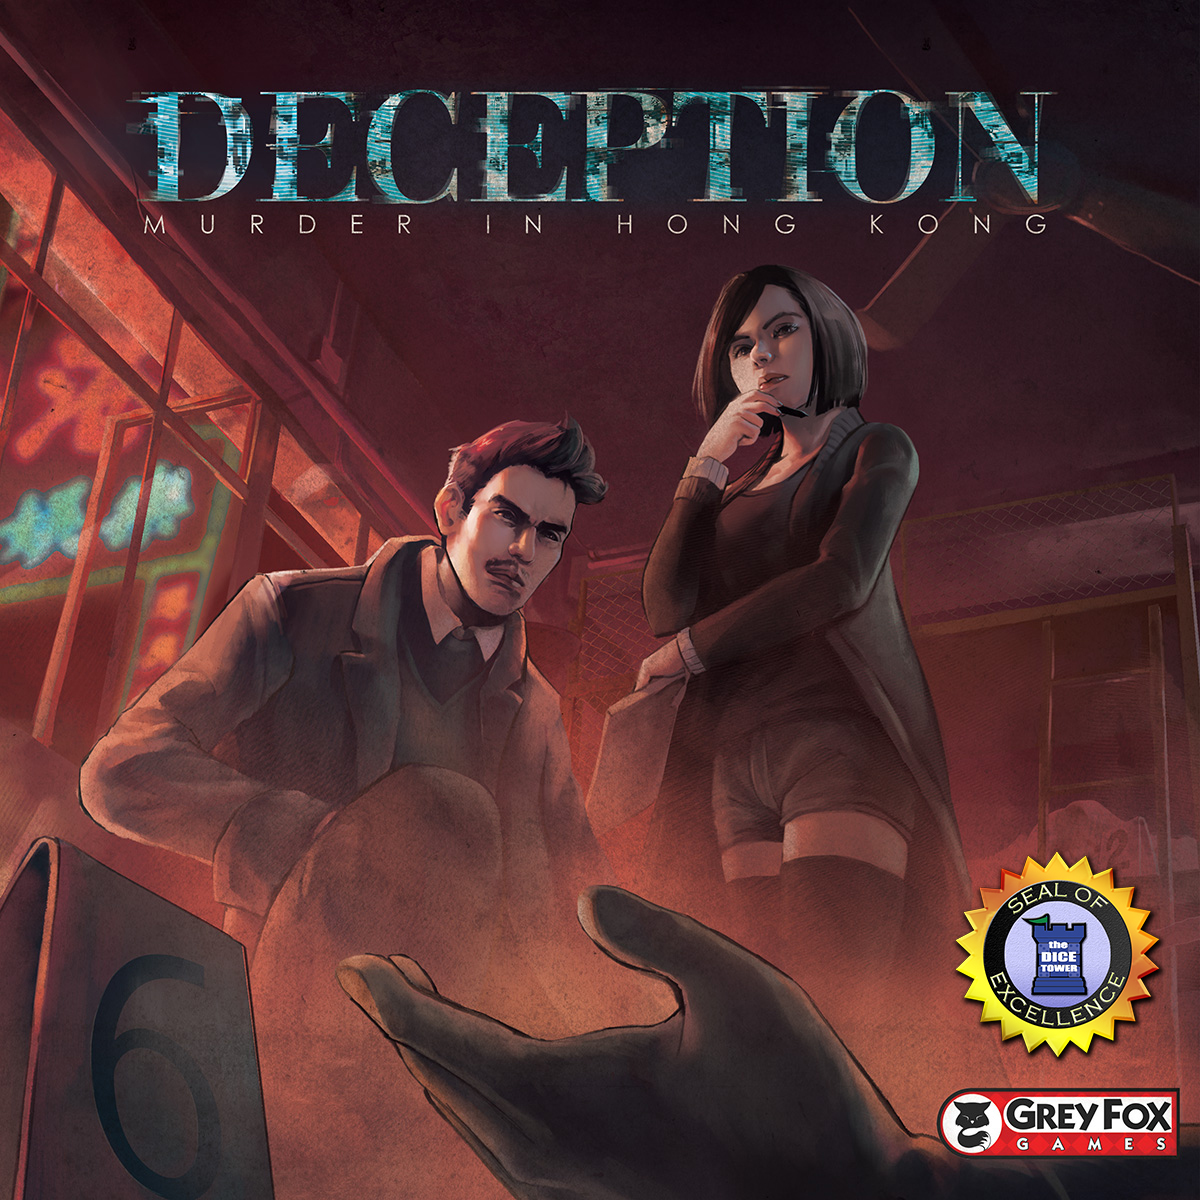 Deception board game review